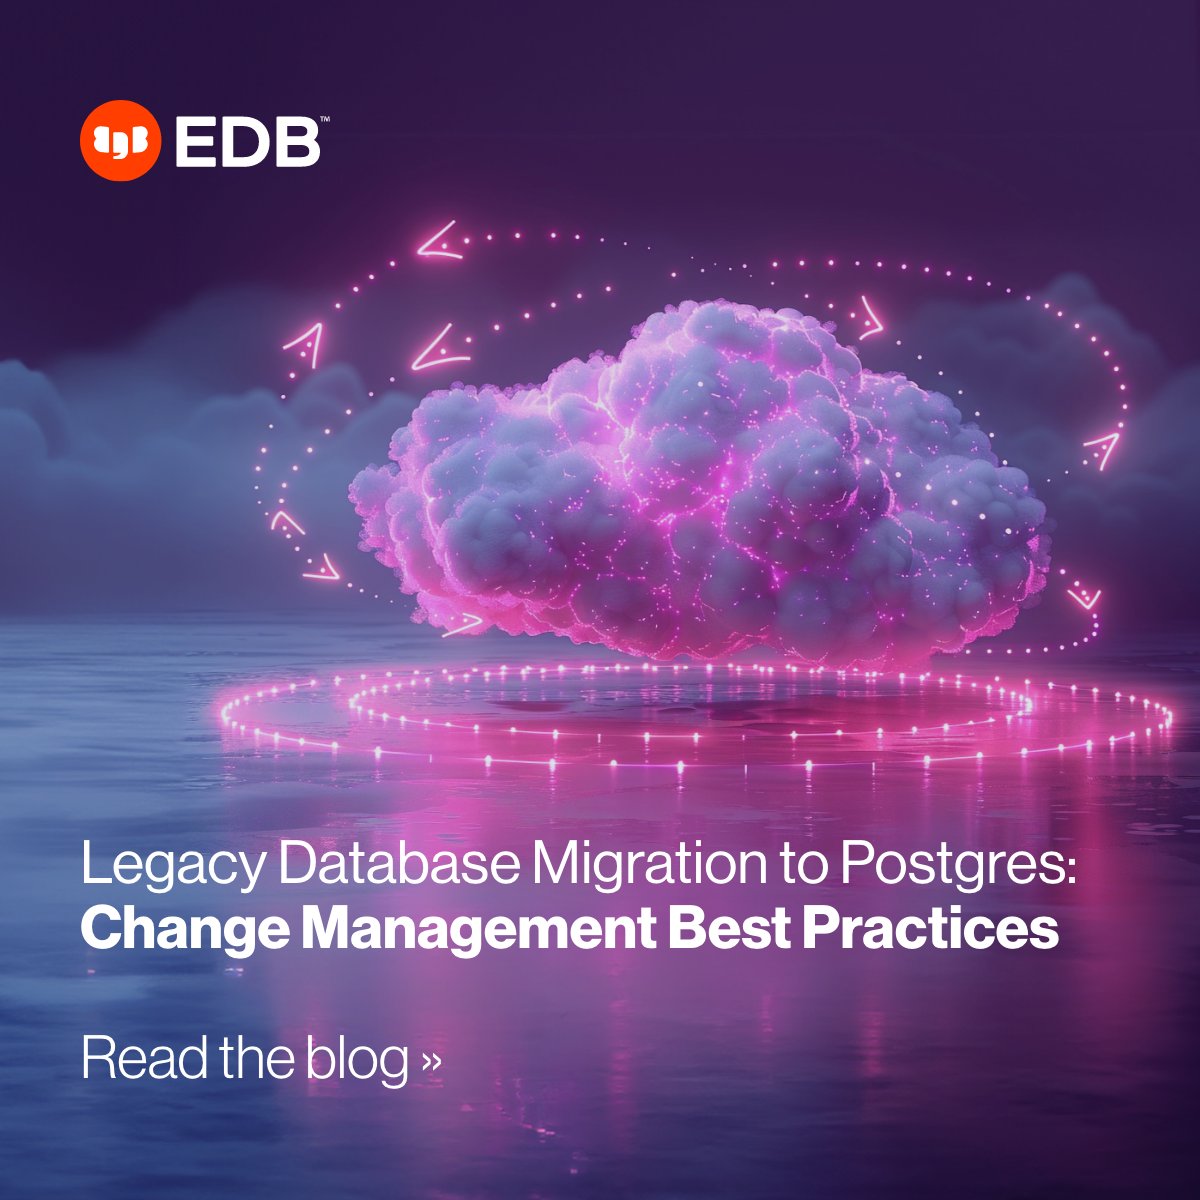 Migrating from legacy databases to #Postgres is an effort in change management across the organization. Discover each step of the process from pre-migration discovery to successful execution in our latest blog post. ➡️ bit.ly/3Qgh0SJ #opensource #database